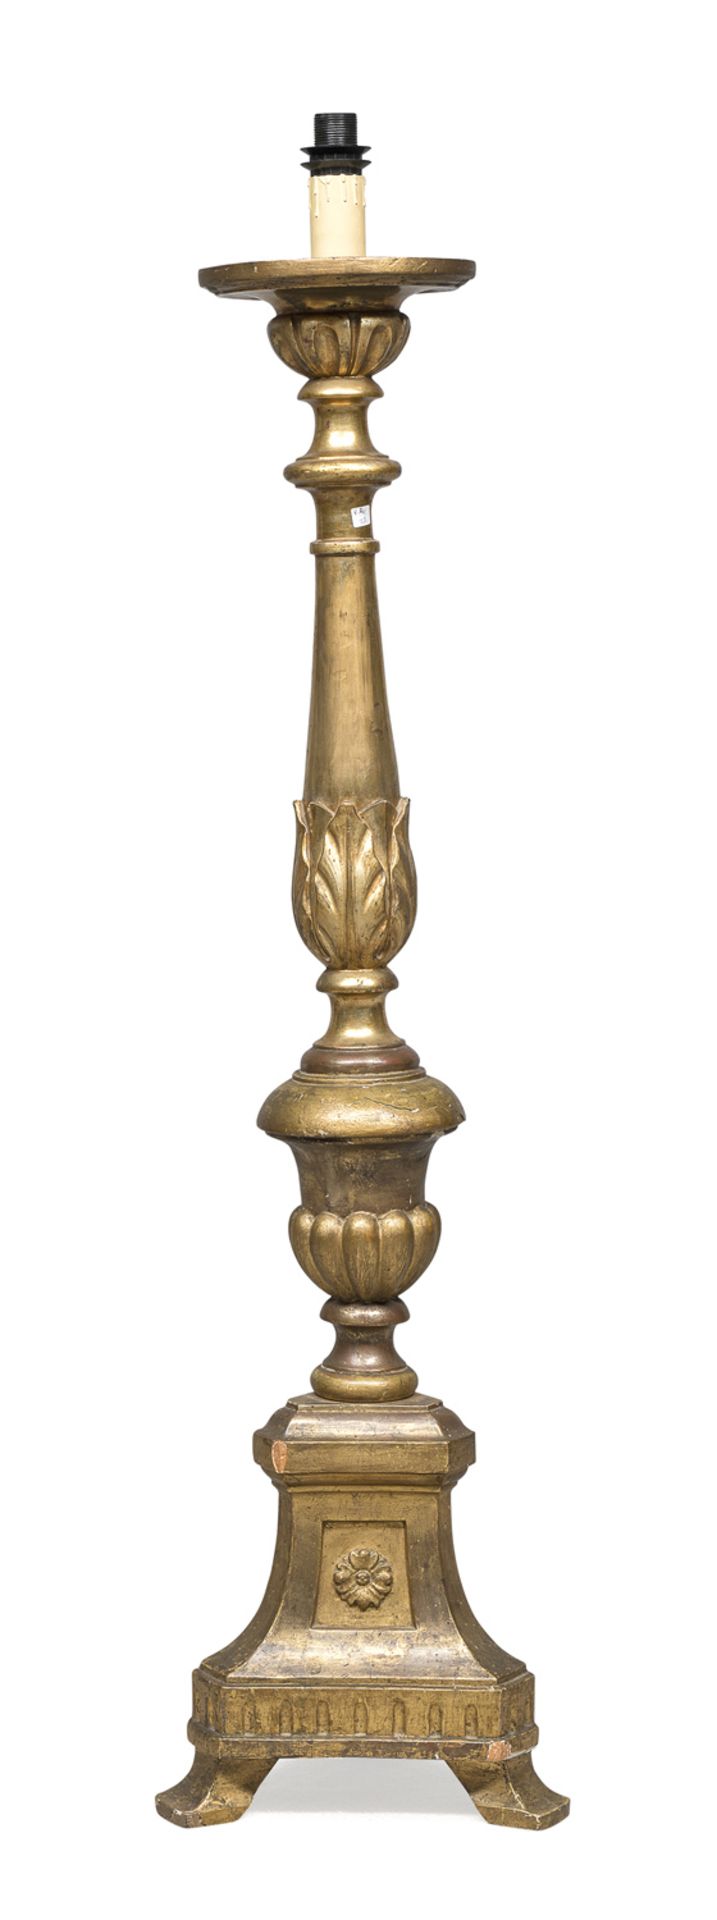 FLOOR CANDLESTICK IN GILTWOOD ROME 18th CENTURY